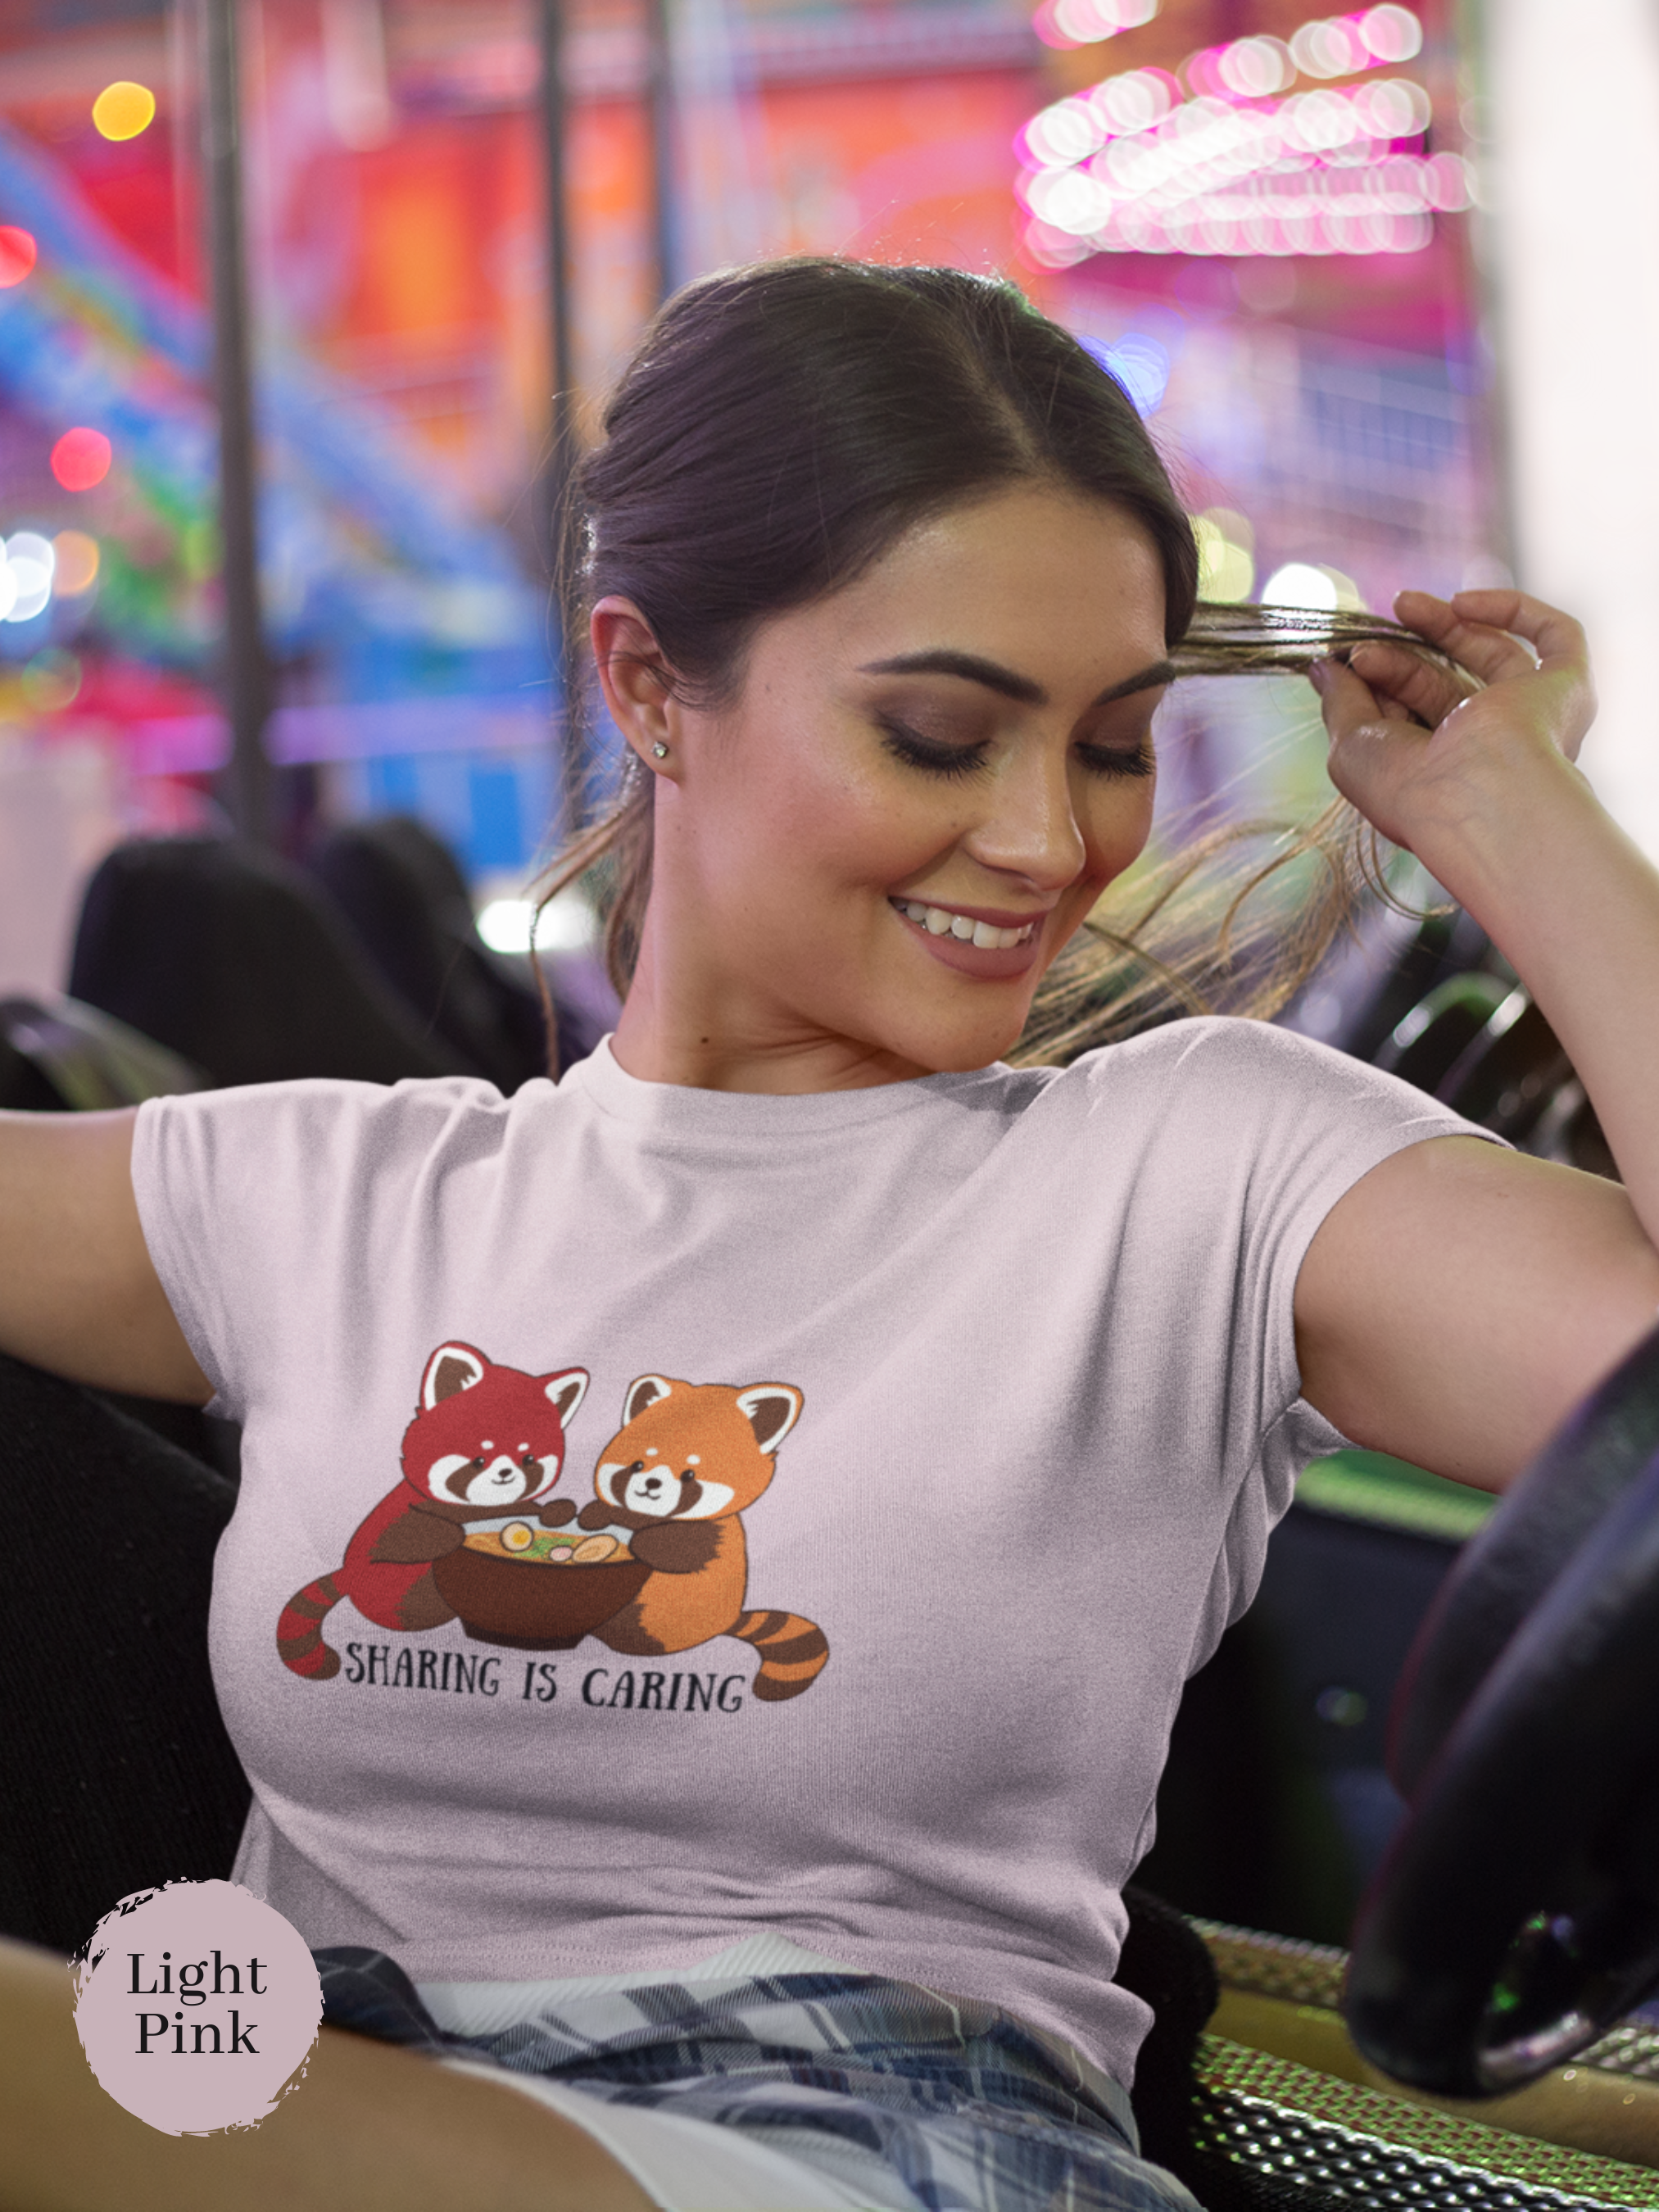 Ramen T-Shirt: Sharing is Caring - Cute Japanese Foodie Tee with Ramen Art Featuring Adorable Red Pandas and Delicious Ramen Bowl